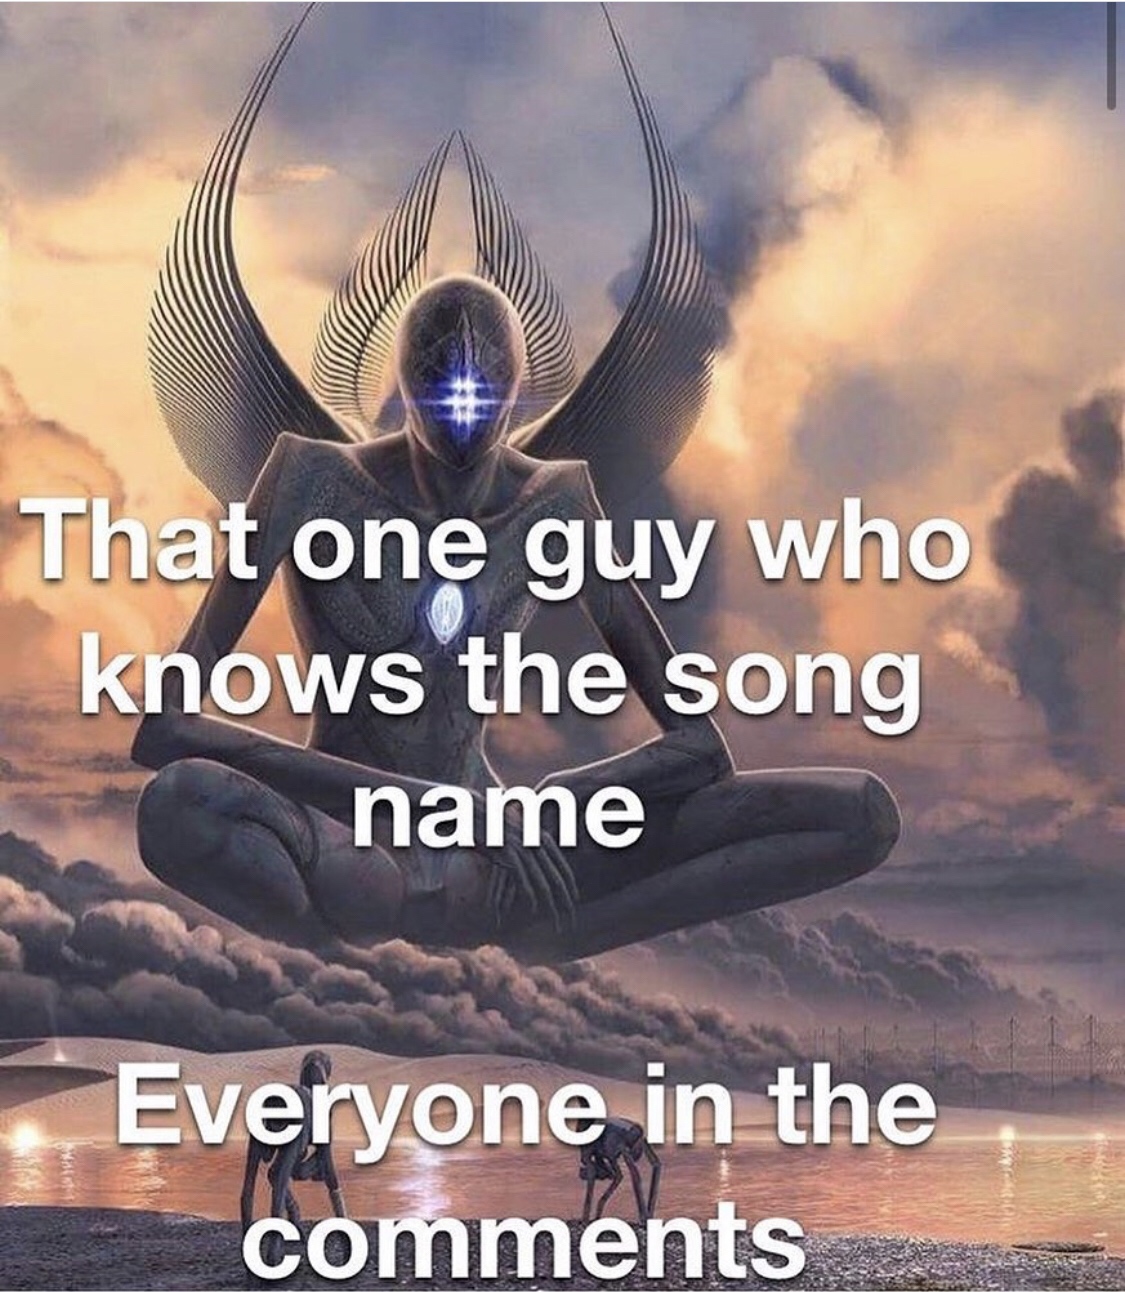 meme archivist - That one guy who knows the song name Everyone in the